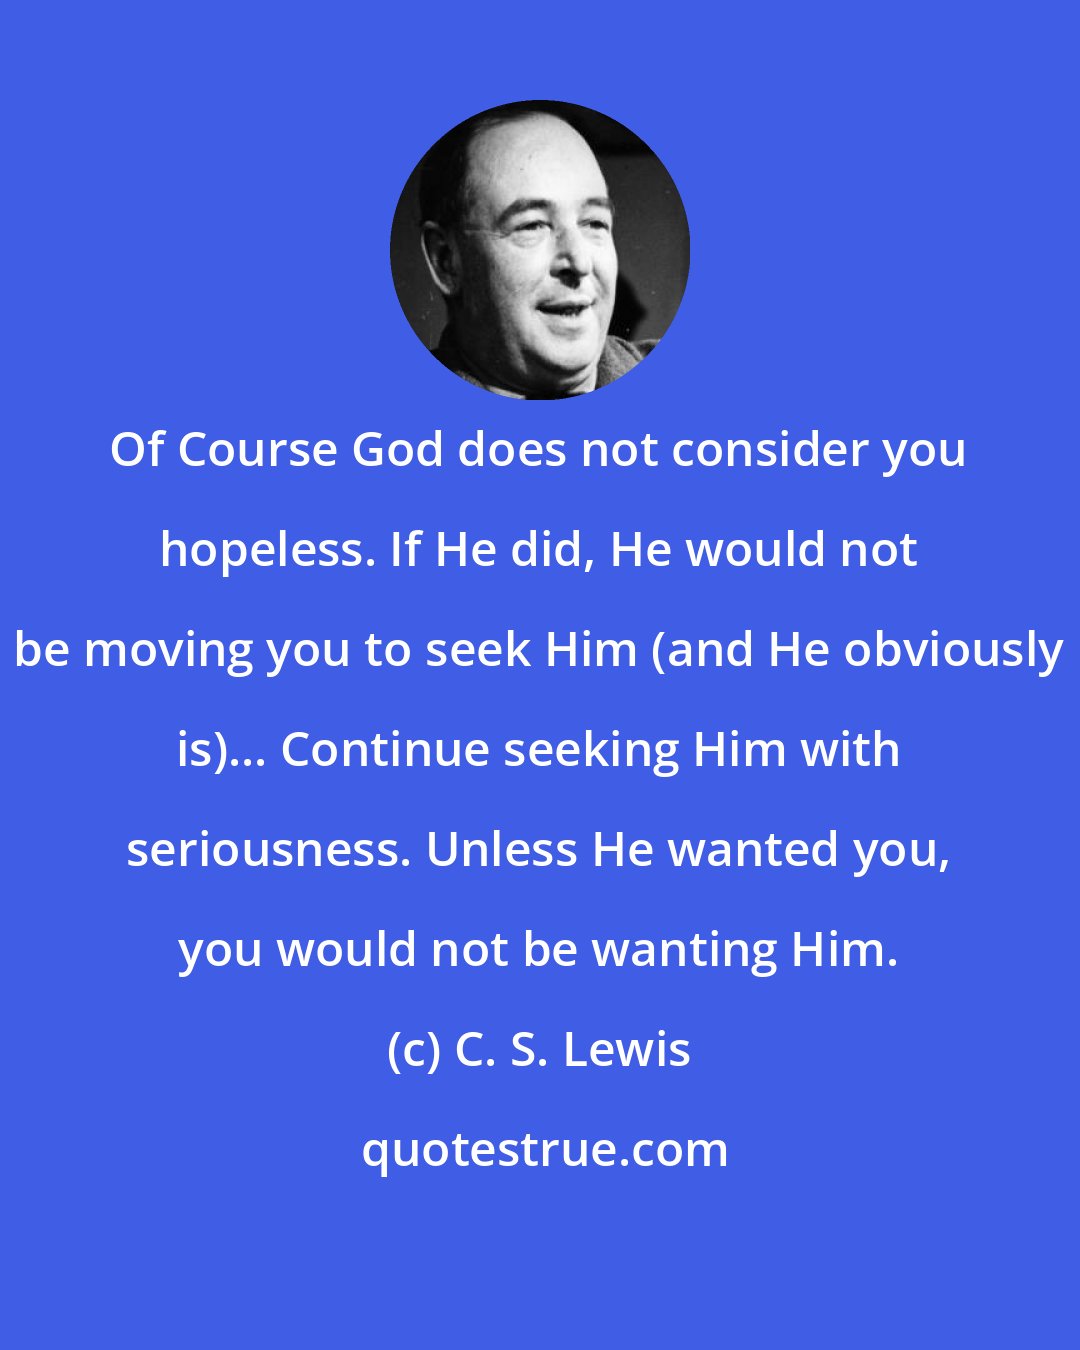 C. S. Lewis: Of Course God does not consider you hopeless. If He did, He would not be moving you to seek Him (and He obviously is)... Continue seeking Him with seriousness. Unless He wanted you, you would not be wanting Him.